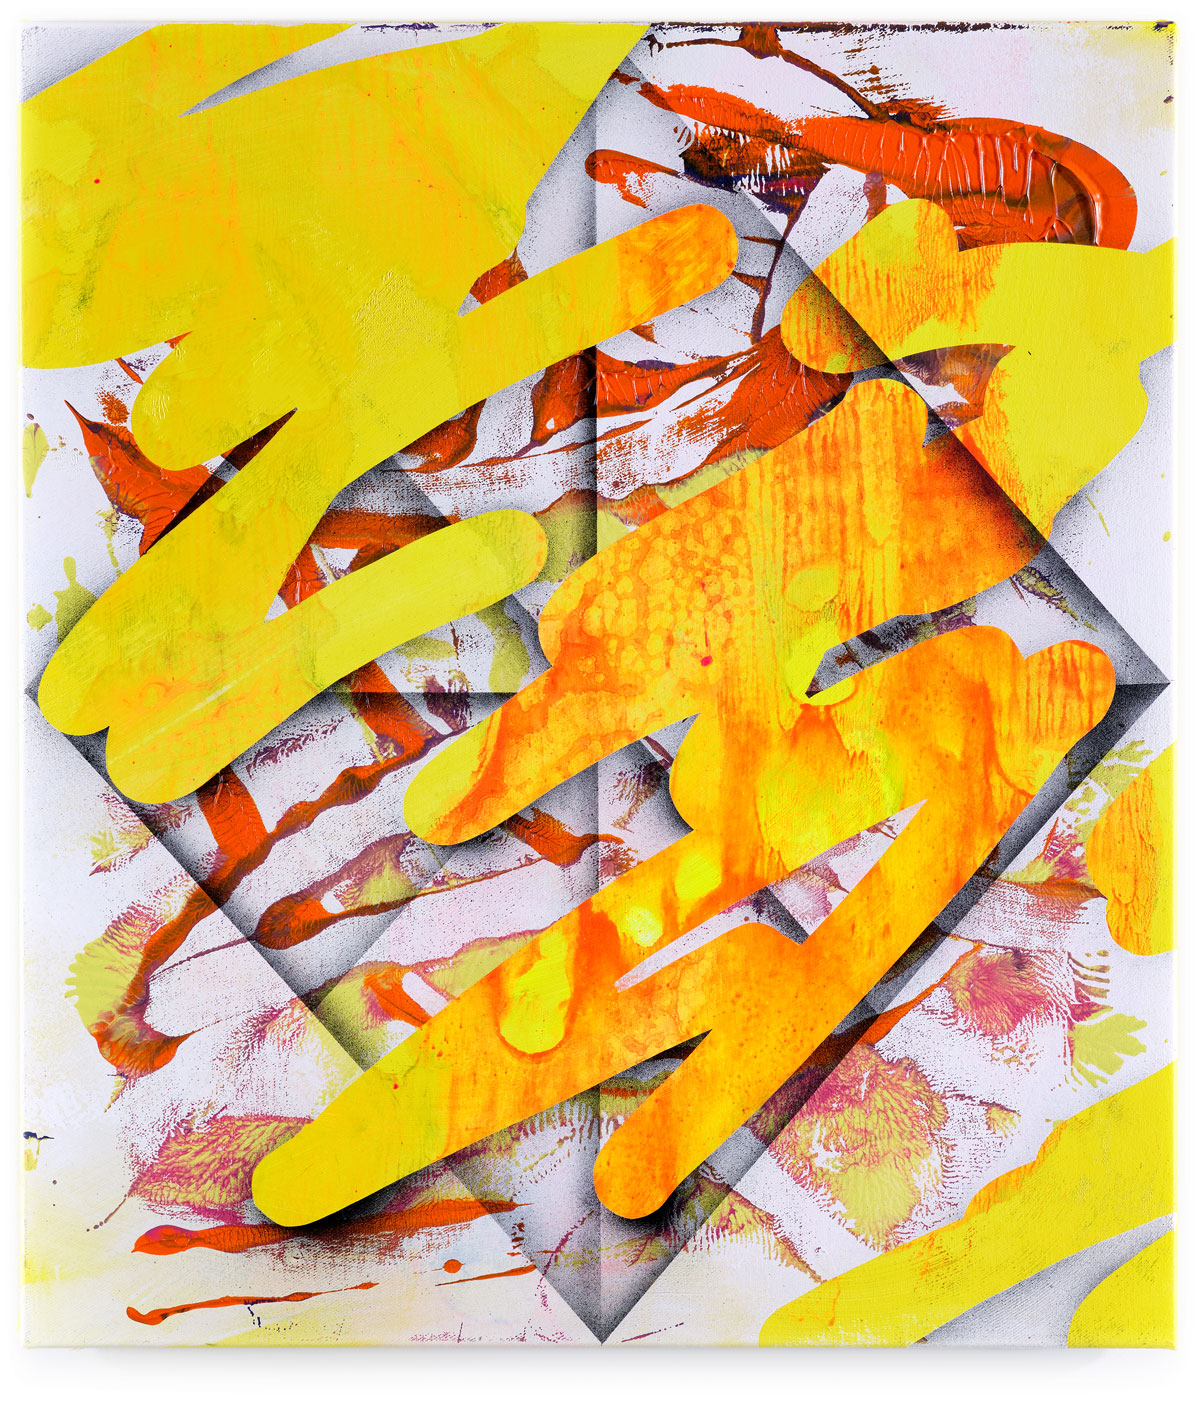 Malwin Faber, 22-010, 2022, acrylic and spray paint on canvas, 80 × 70 cm